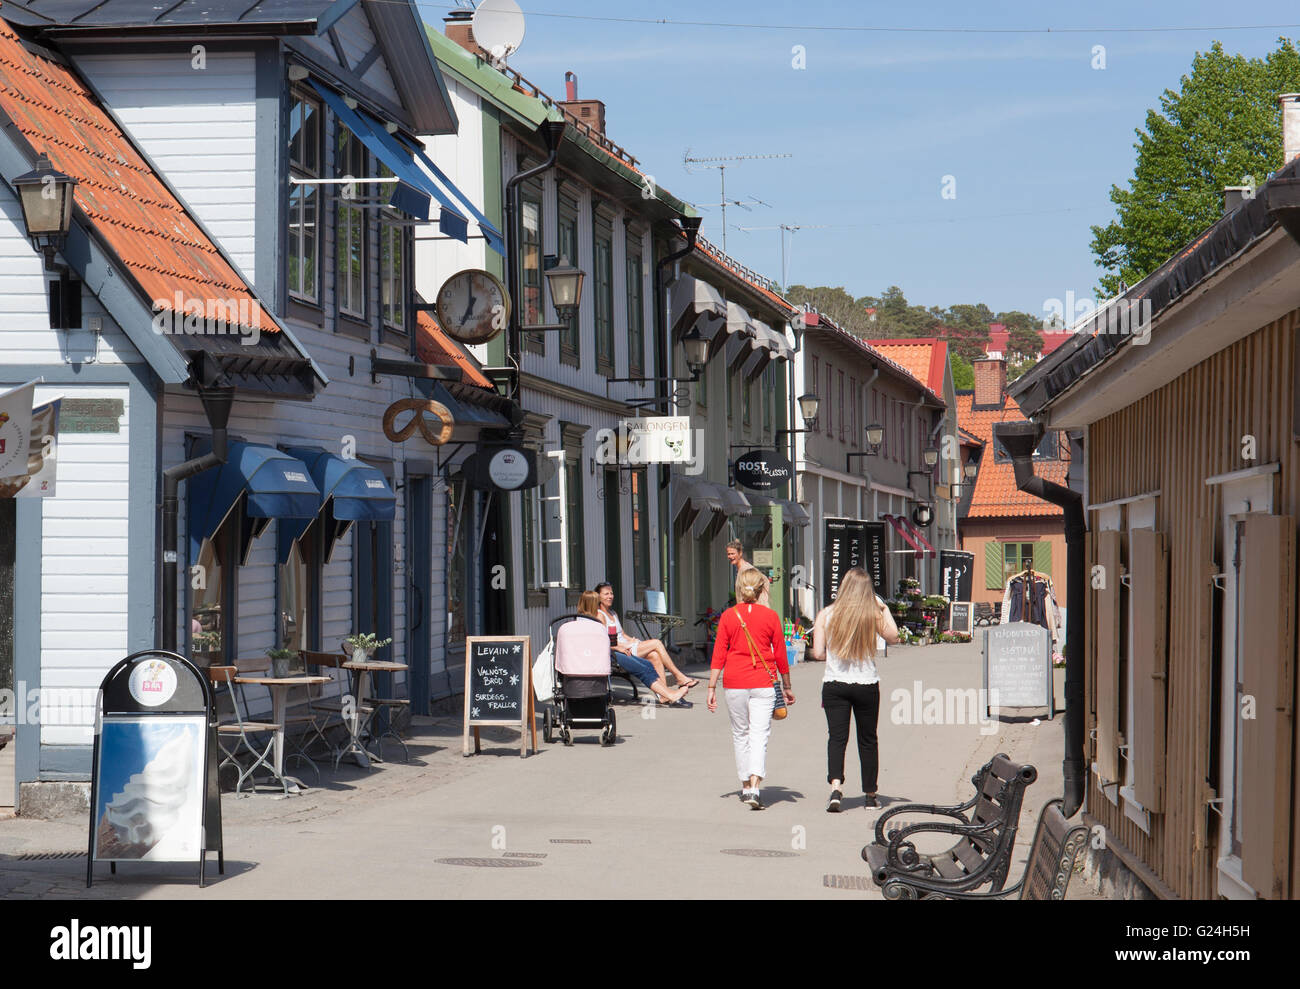 View of the old town street of Sigtuna, Stockholm, Sweden Stock Photo